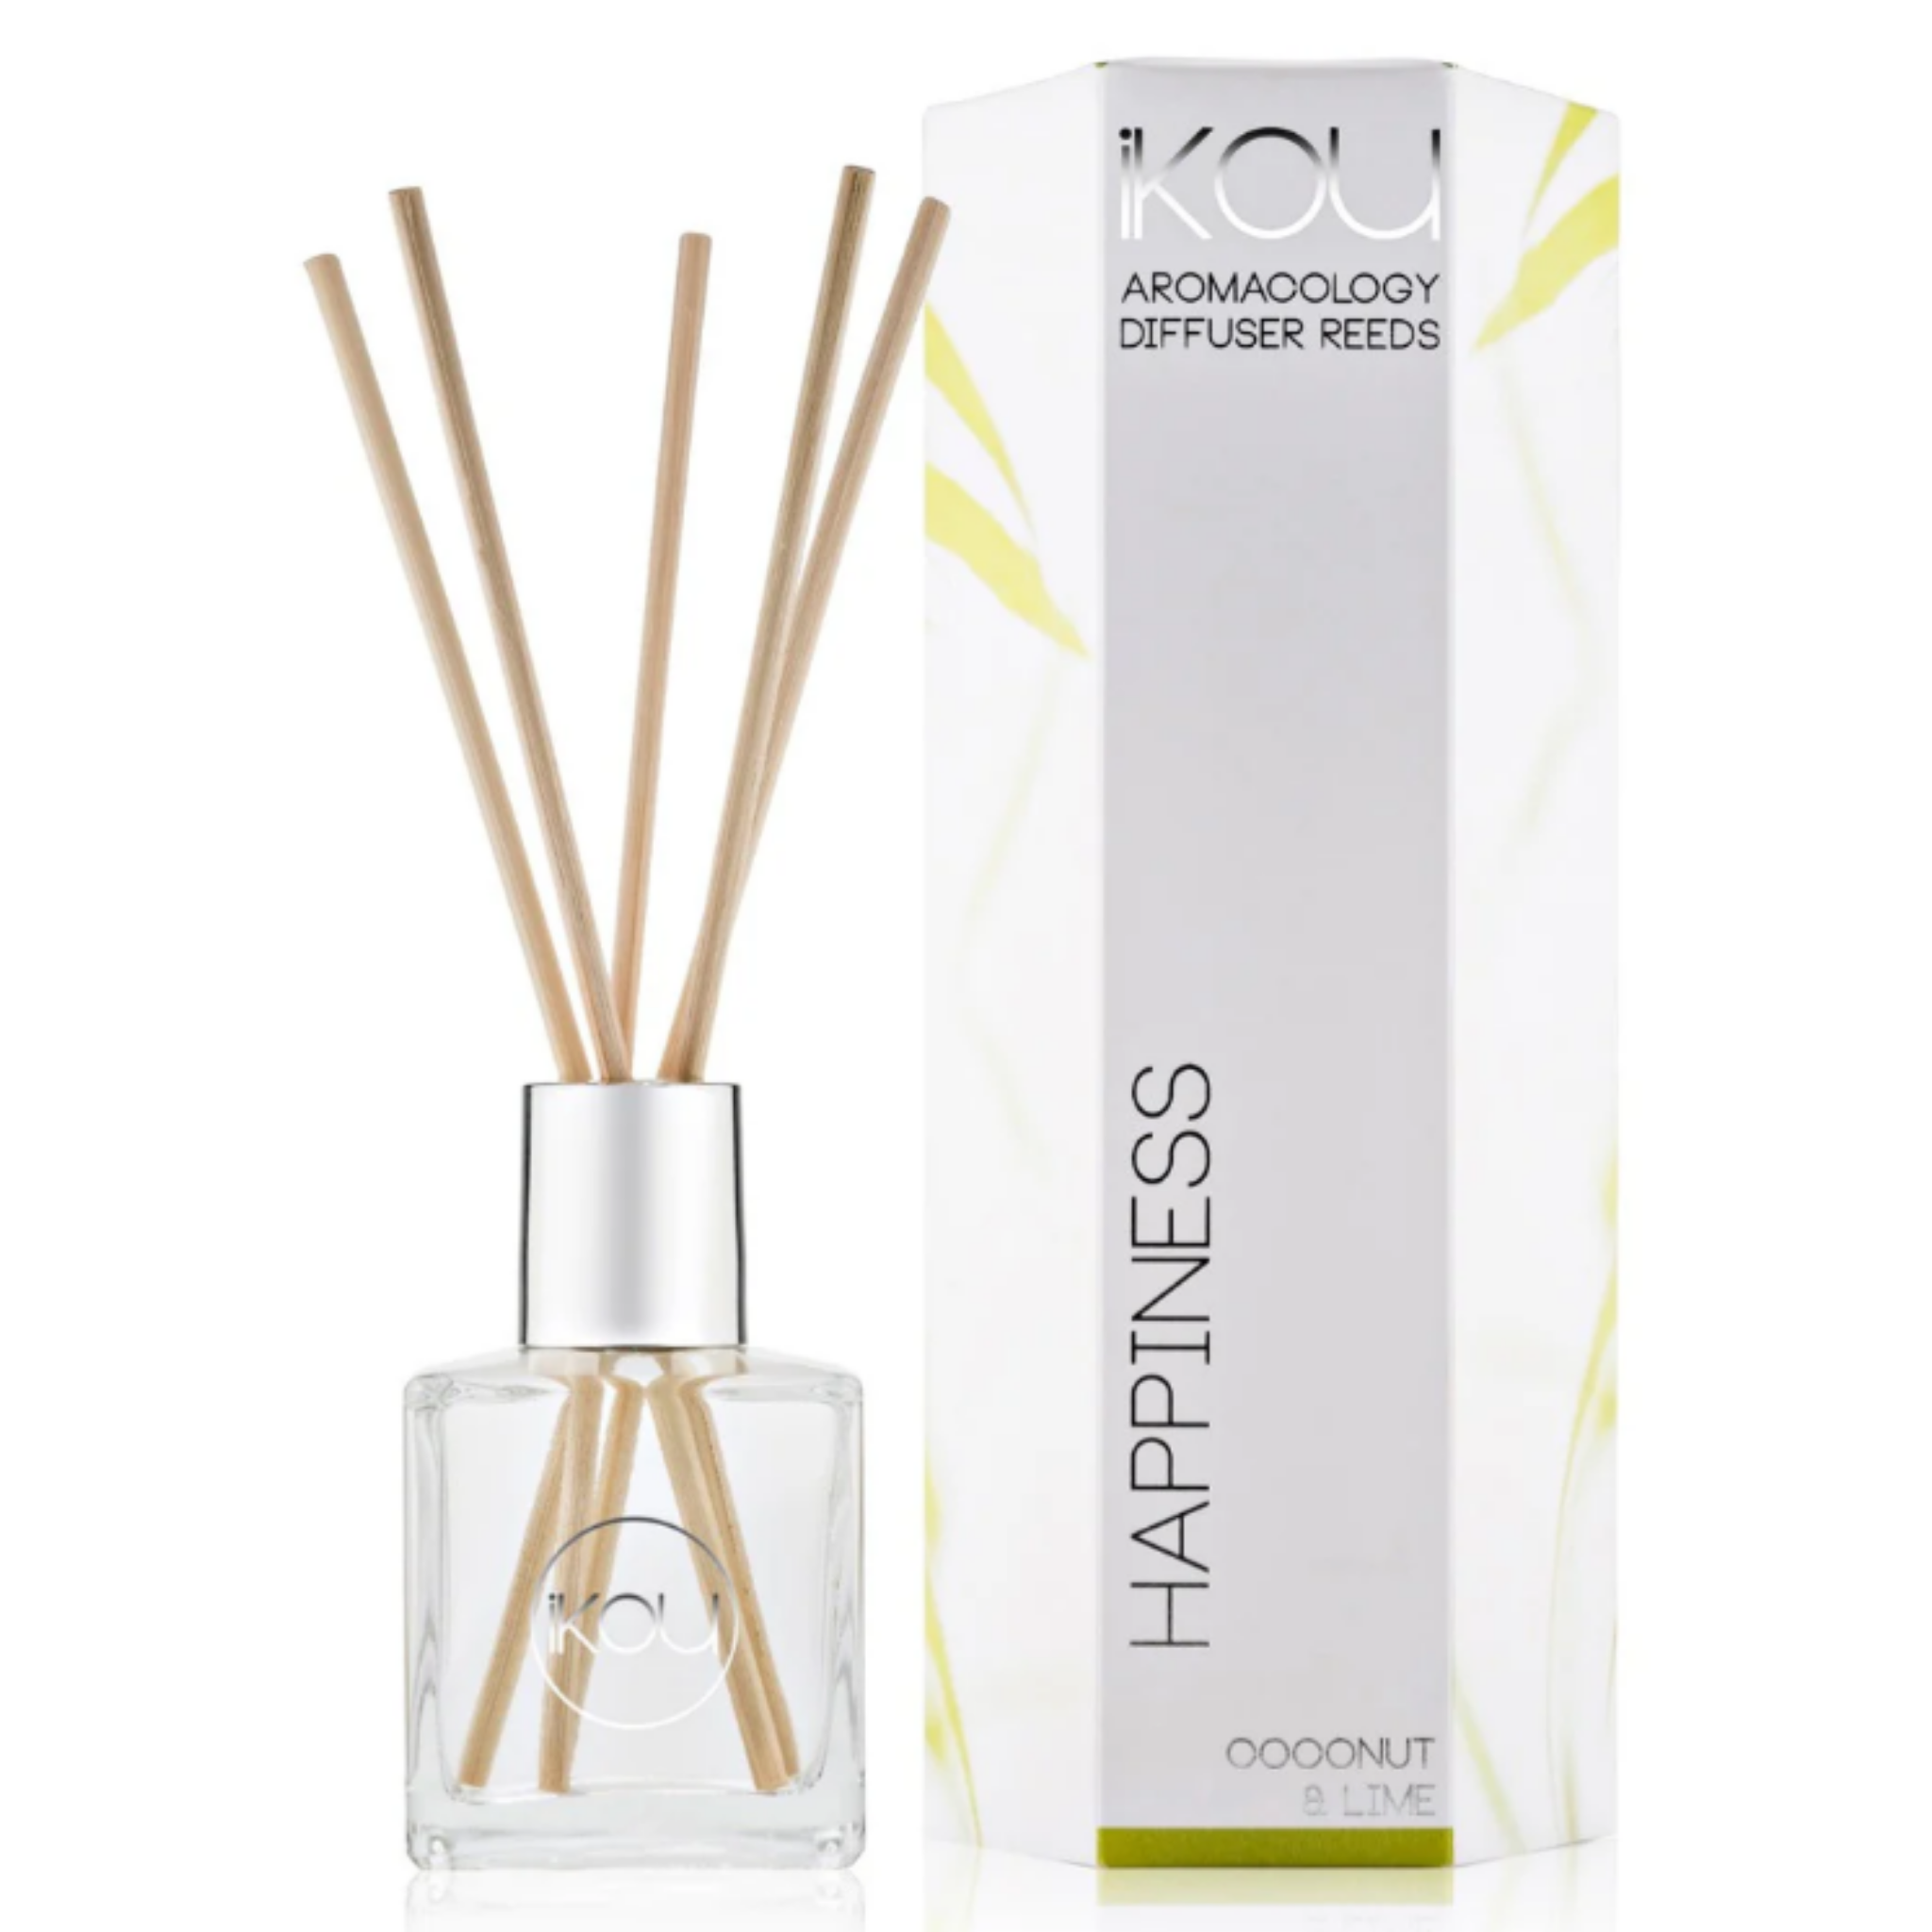 Ikou Aromacology Diffuser Reeds - Happiness